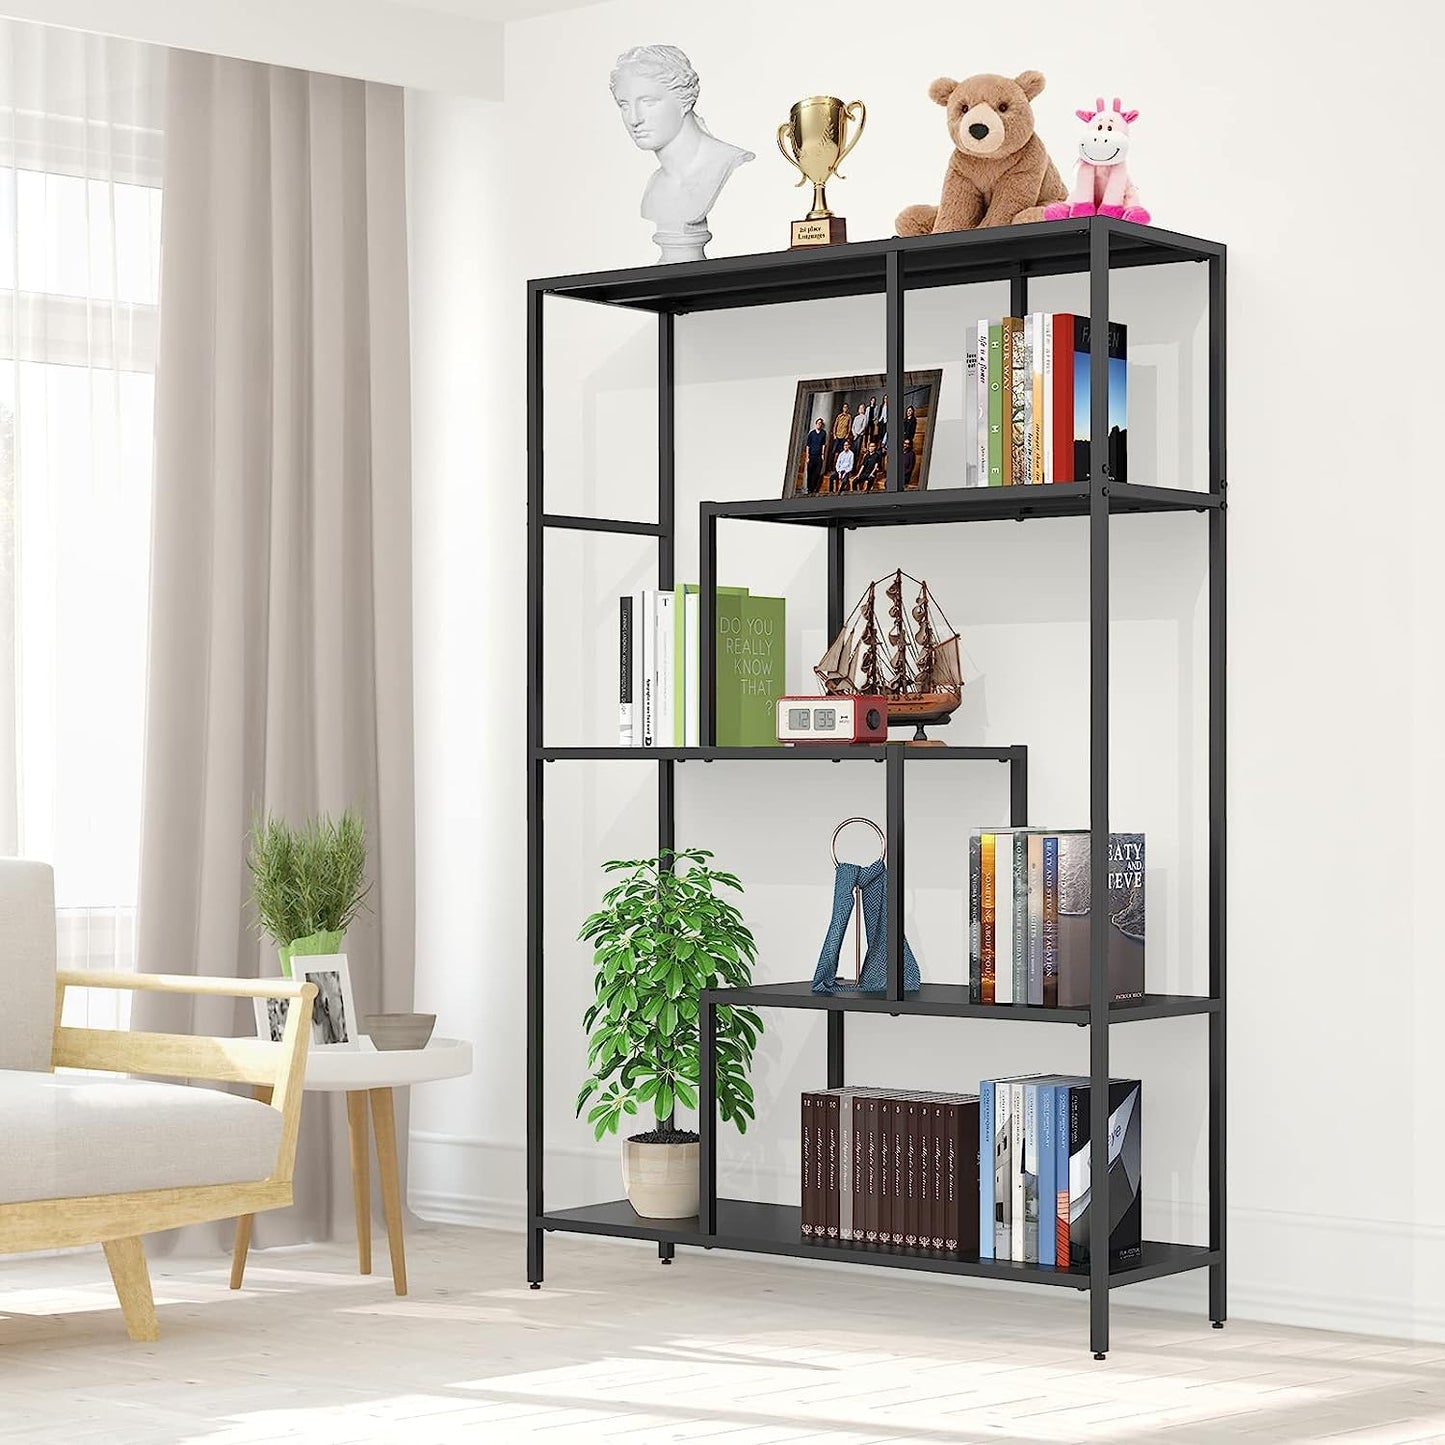 5-Tier Metal Industrial Bookshelf - 59in Height, 39in Width,Rustic Black Display Shelves,Bookcase for Living Room, Bedroom, Kitchen, Office,Farmhouse Decor, Sturdy and Stylish